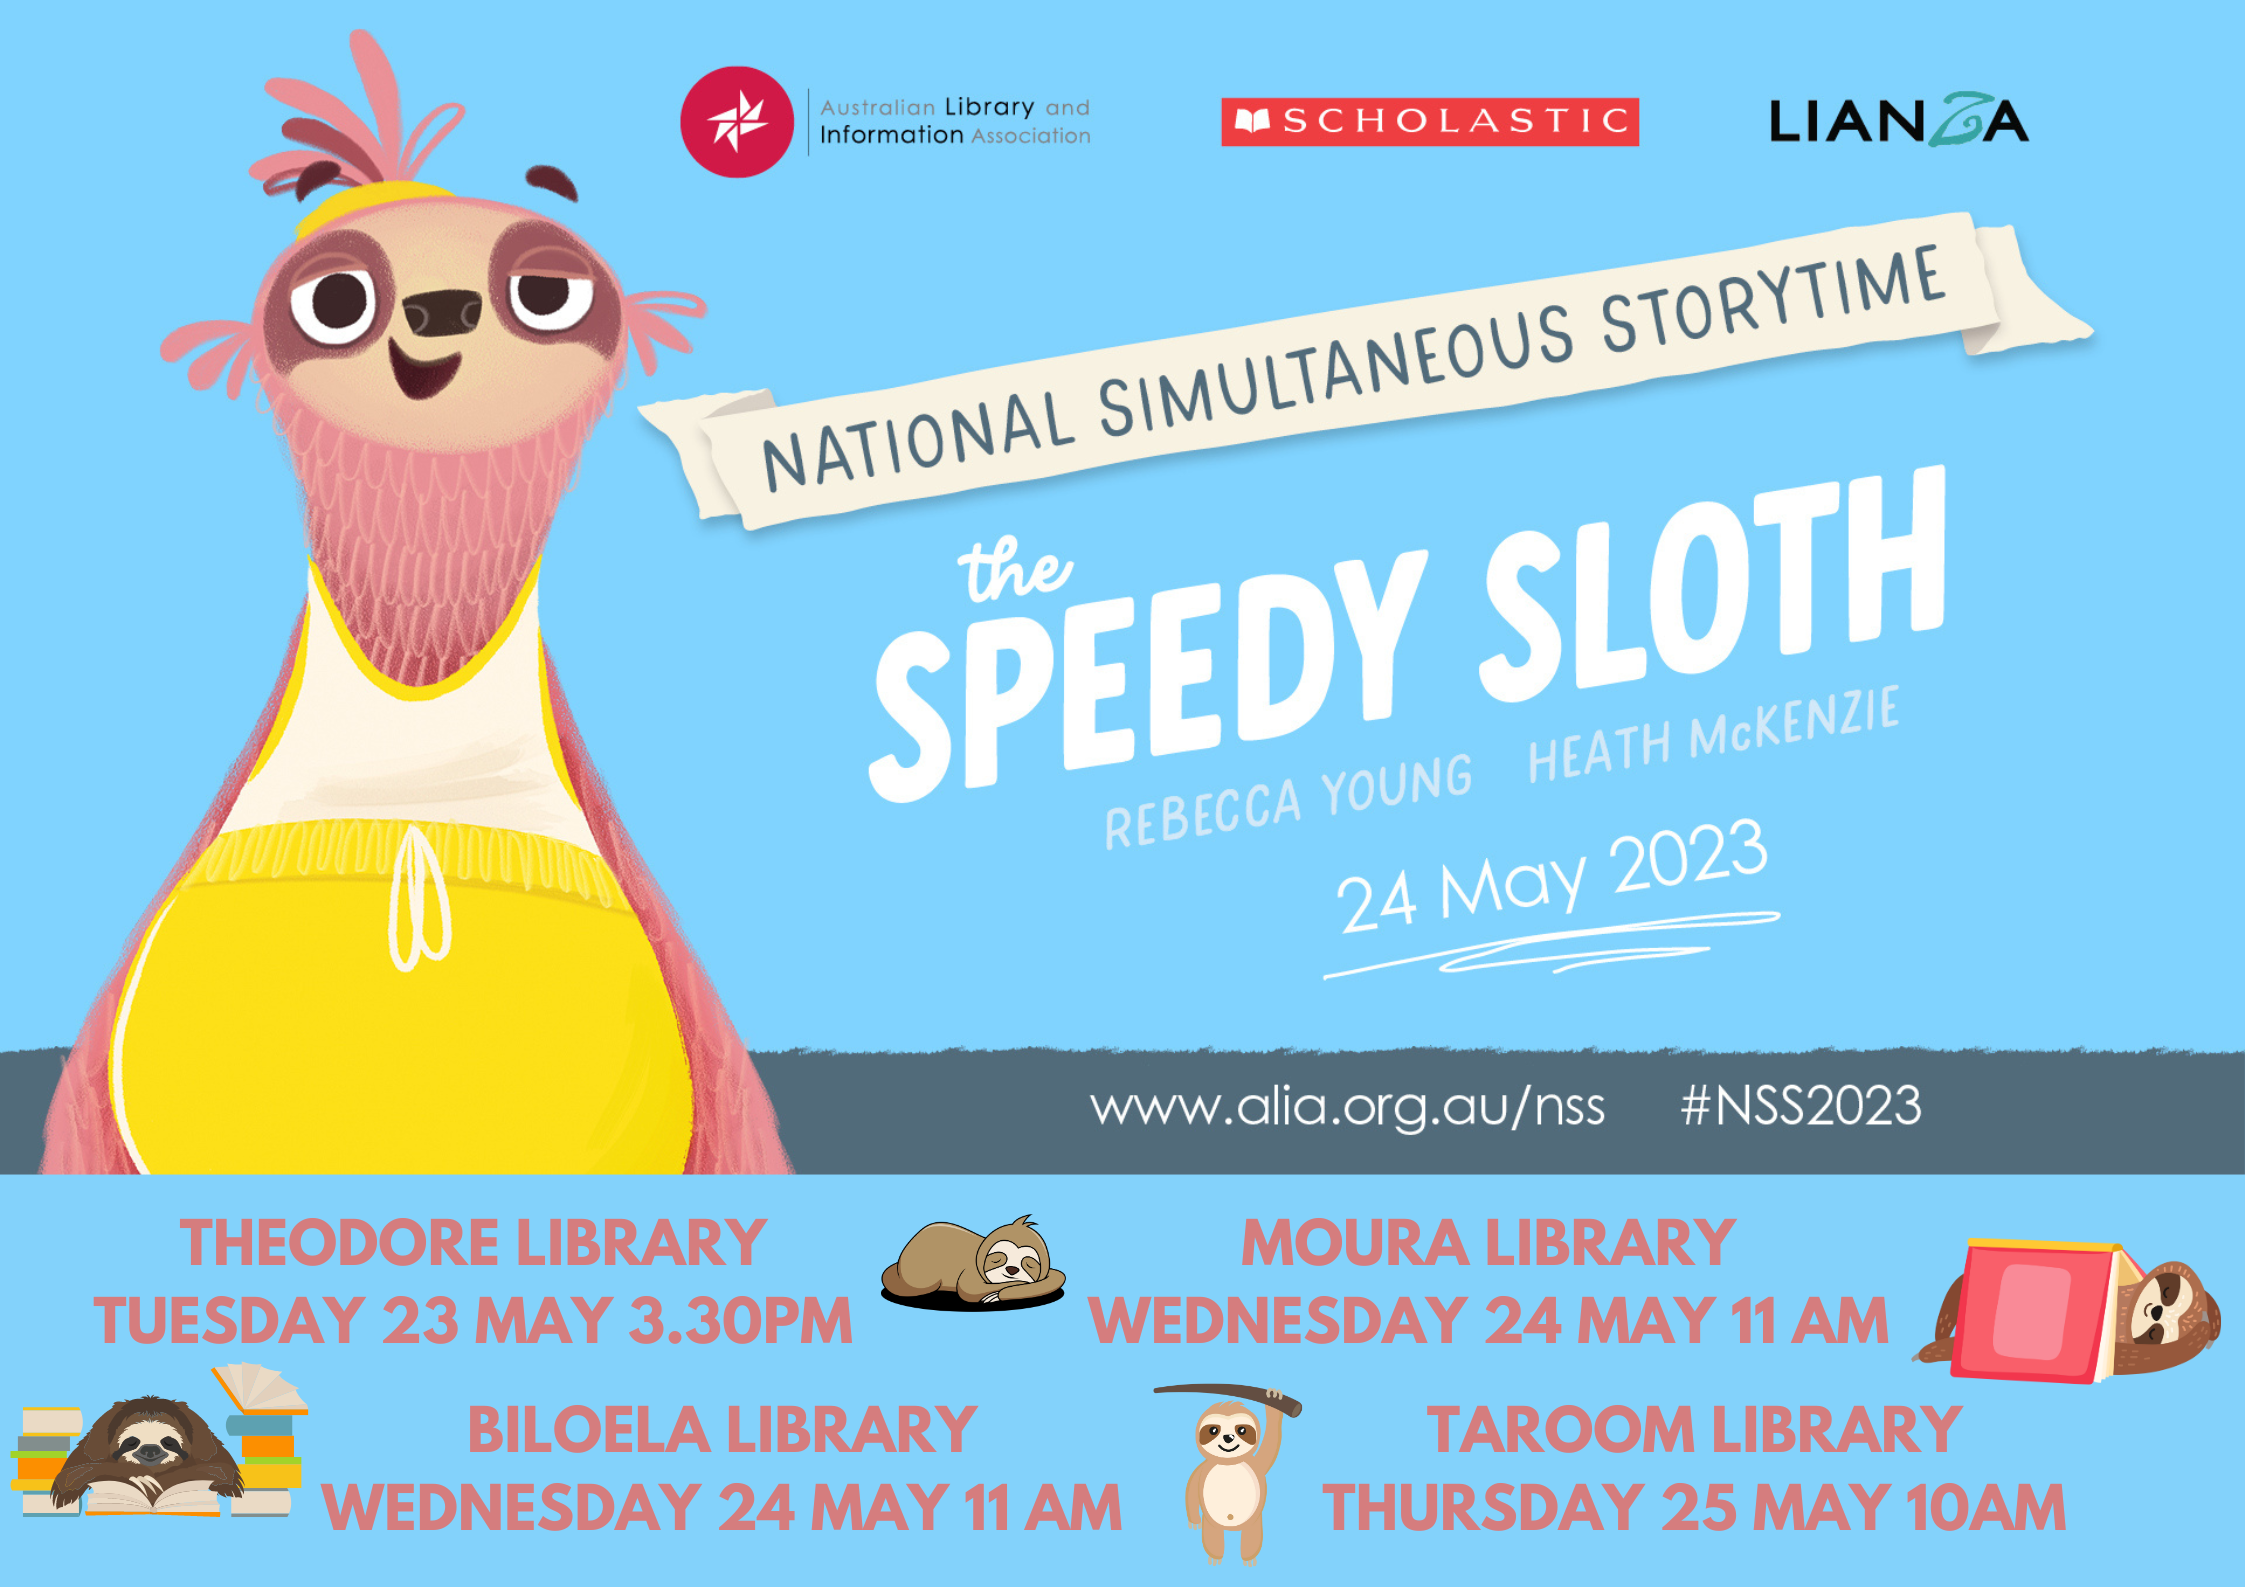 National Simultaneous Storytime. The Speedy Sloth.